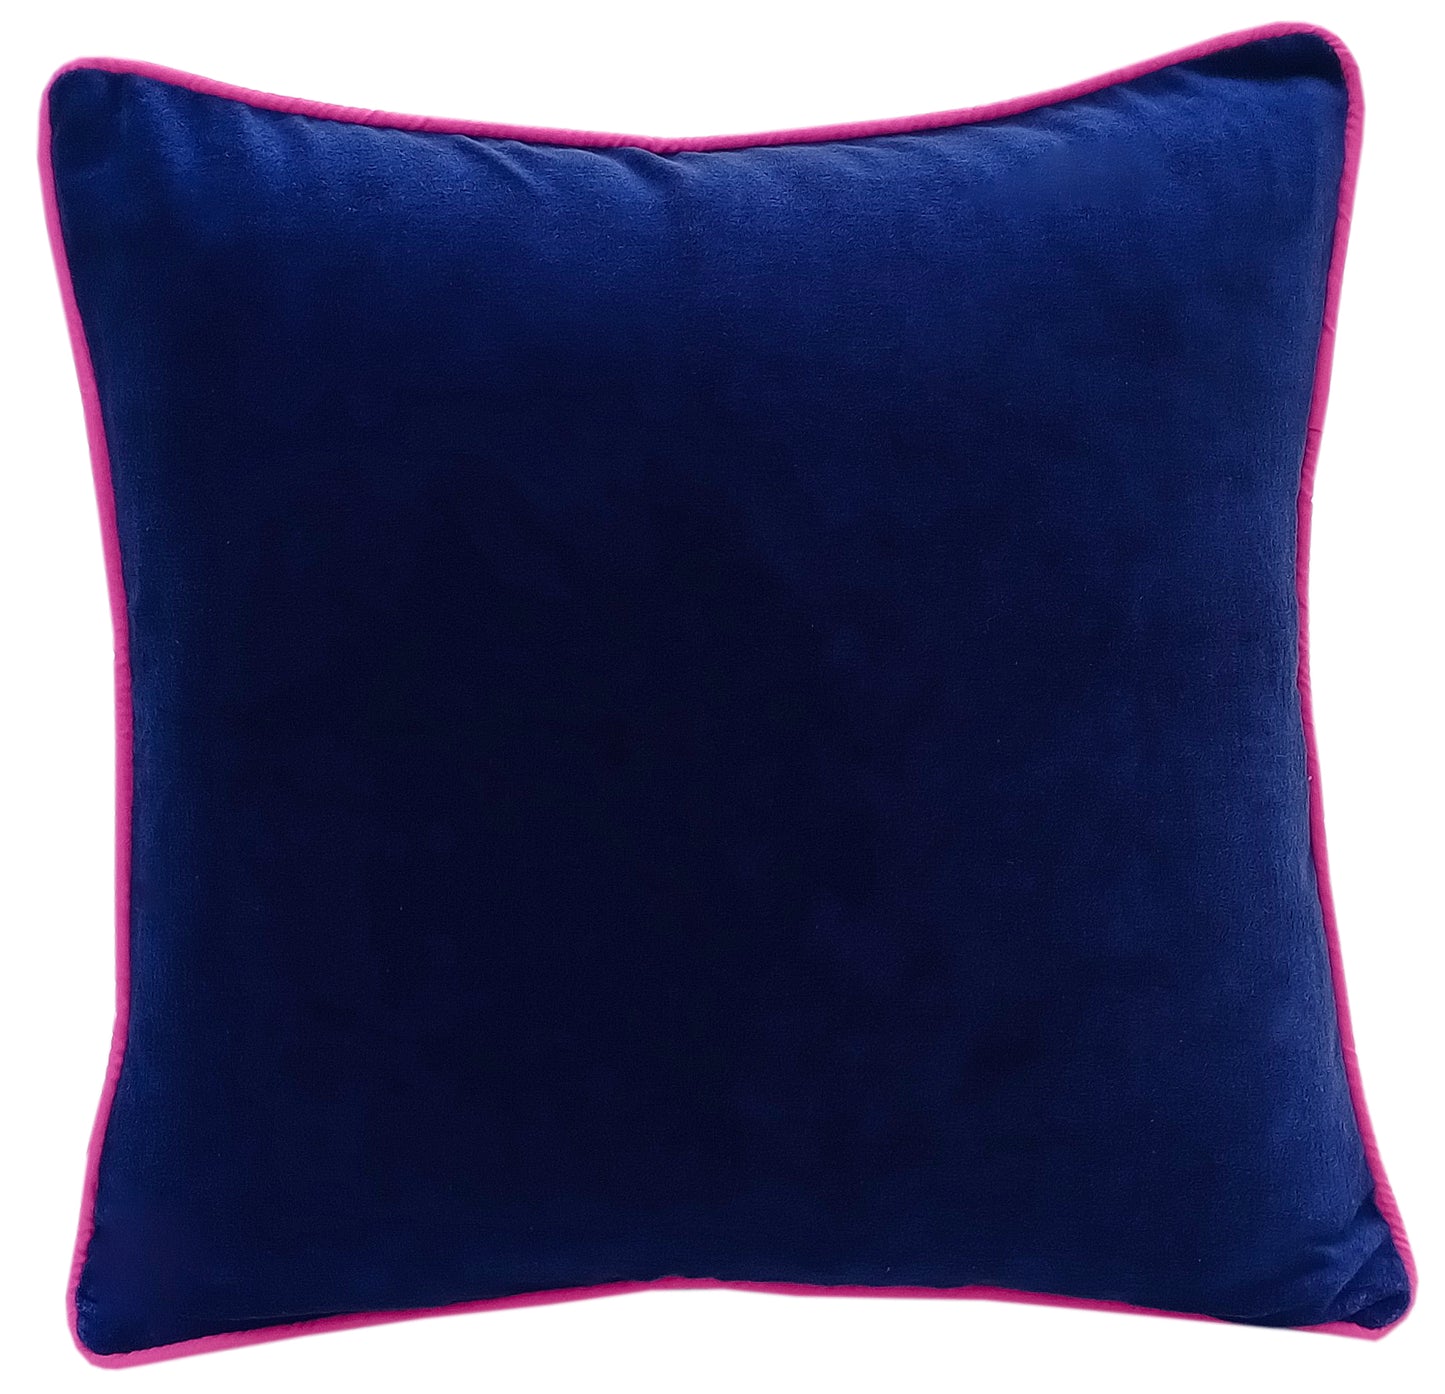 Blue Velvet Cushion Cover with pink piping - The Teal Thread